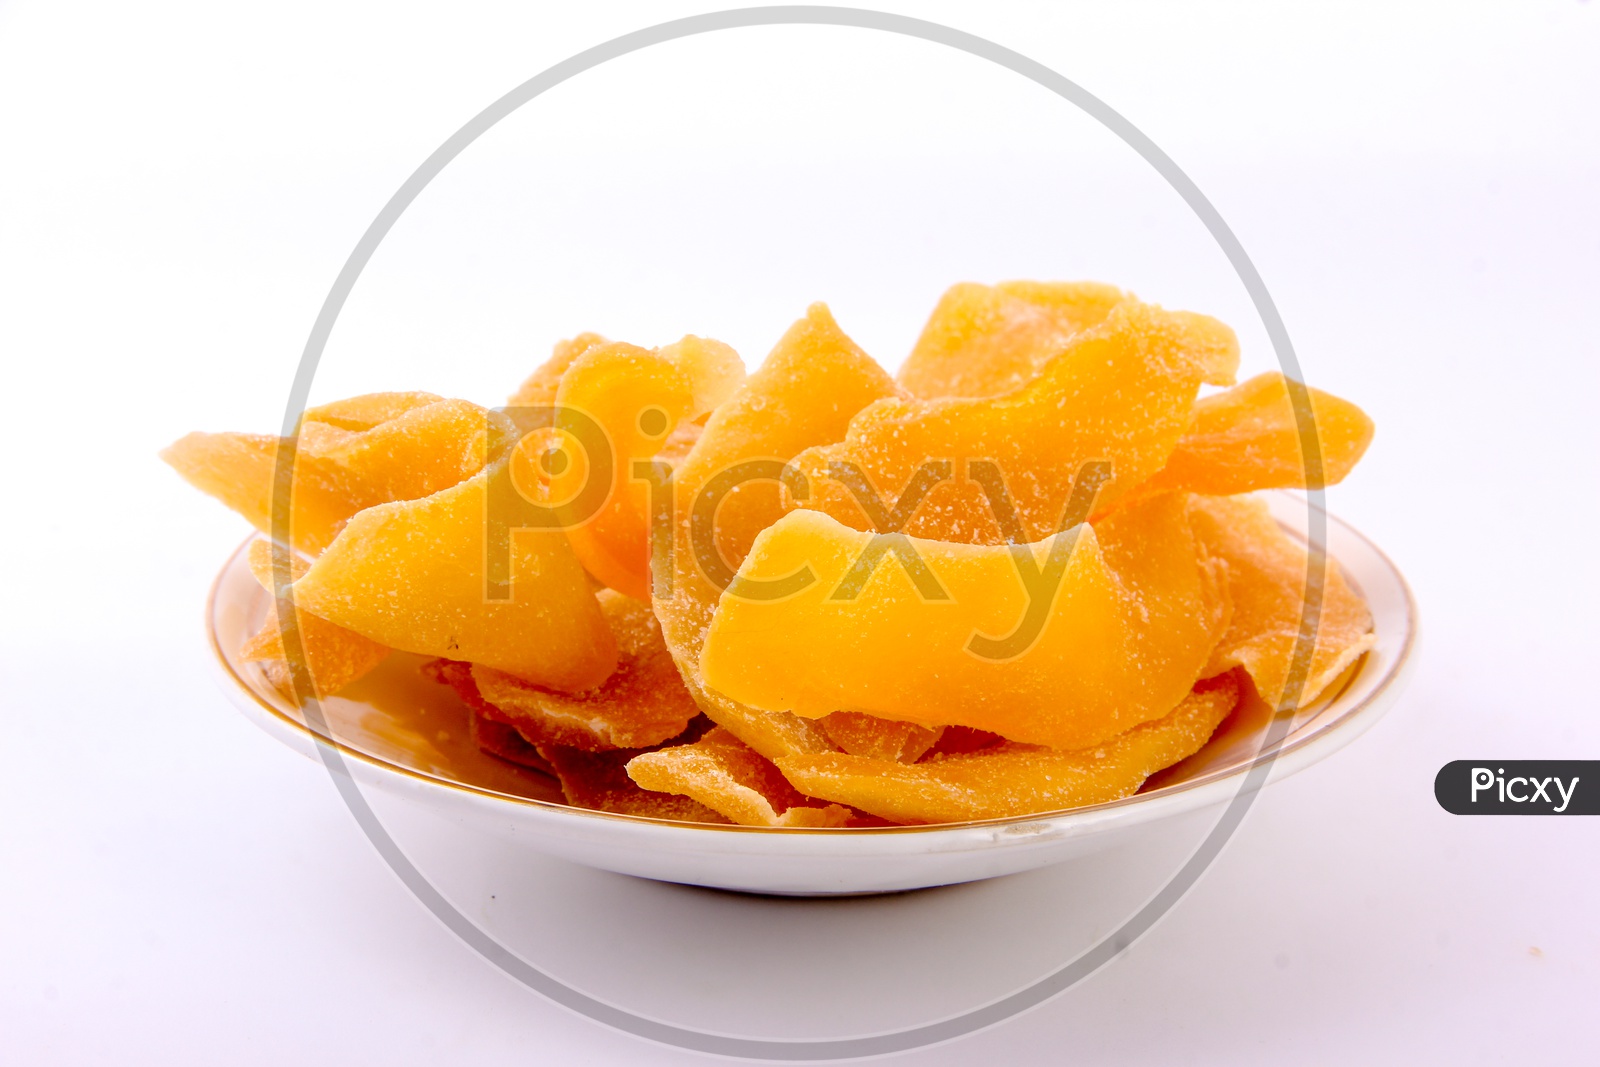 Dried Mango Slices In a Bowl On an Isolated White Back Ground